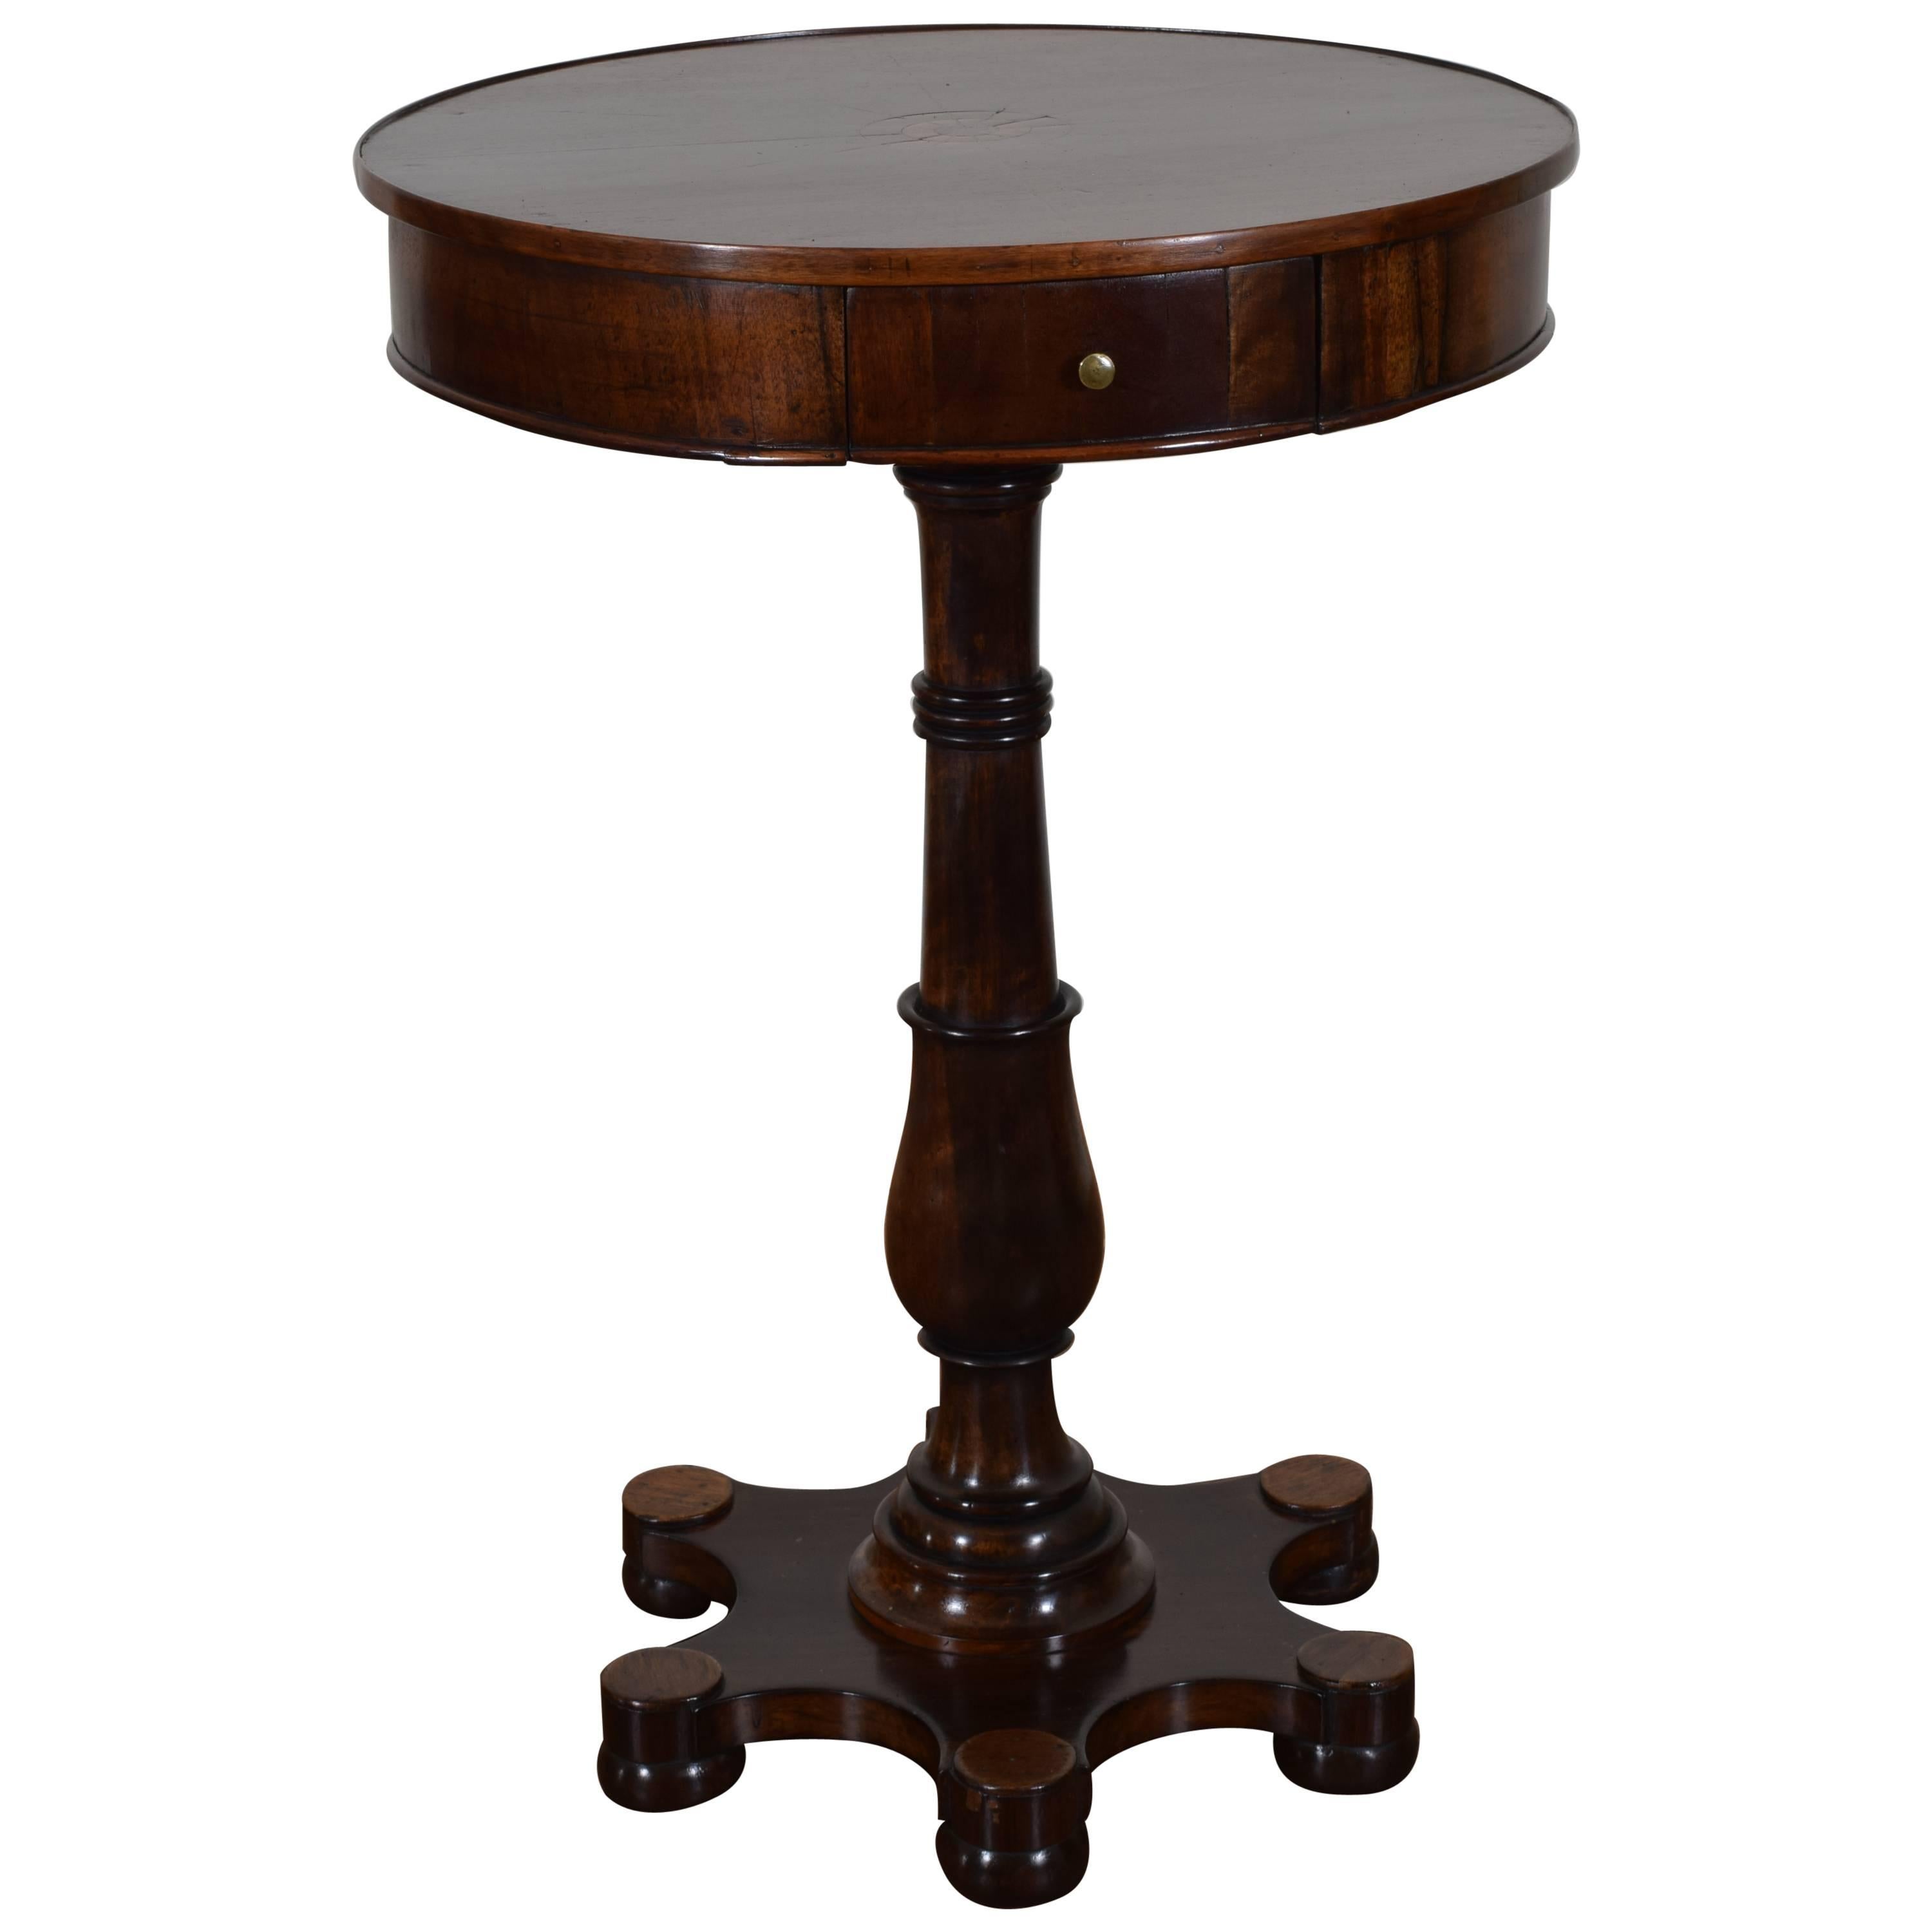 Italian Neoclassic Walnut and Inlaid One-Drawer Table on Six-Footed Base